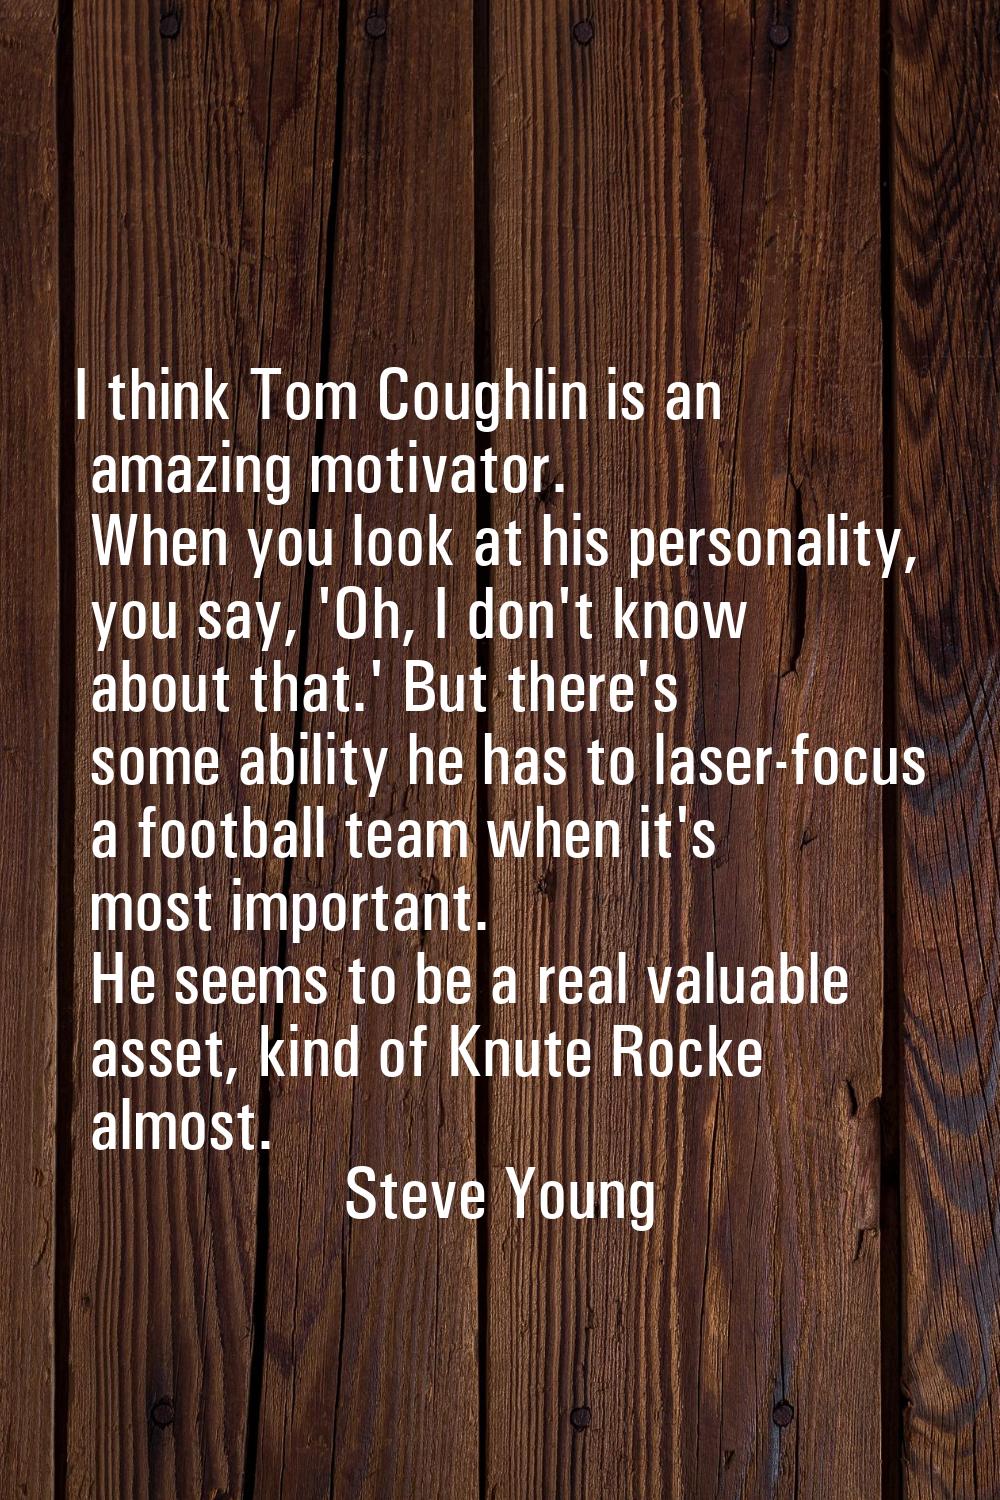 I think Tom Coughlin is an amazing motivator. When you look at his personality, you say, 'Oh, I don